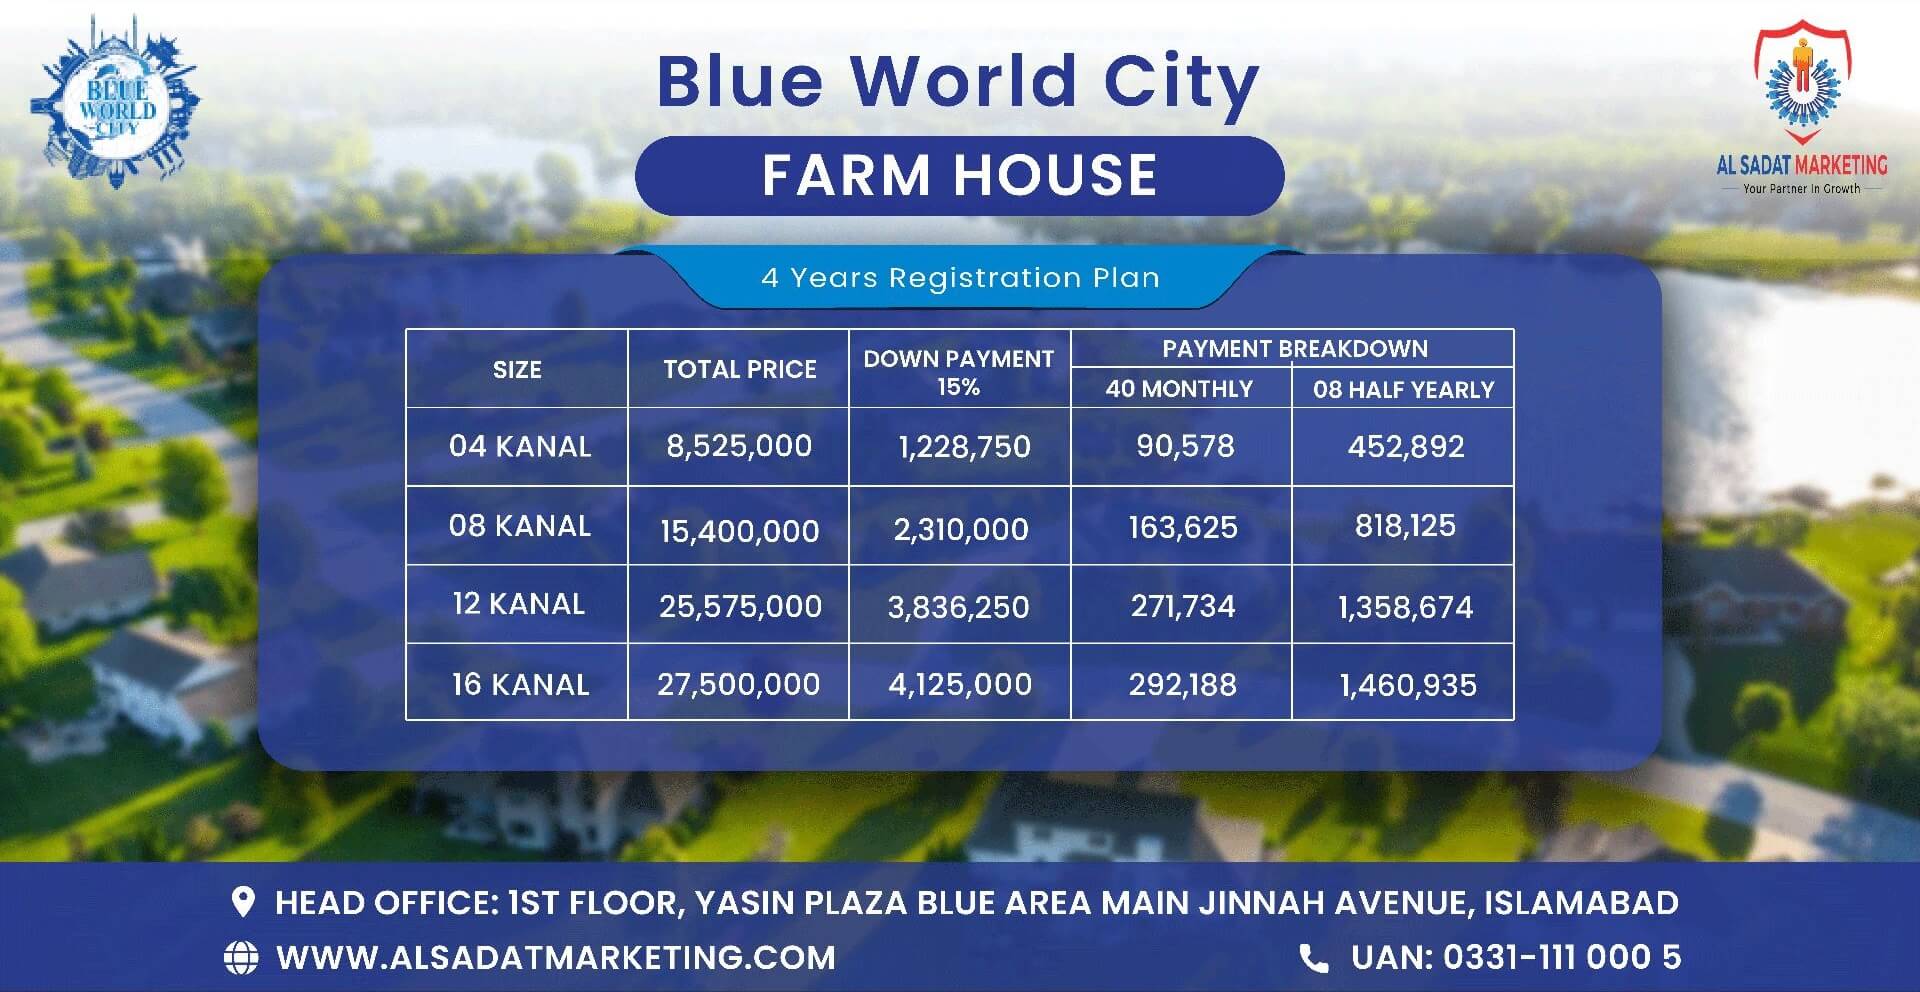 blue world city residential plots payment plan – blue world city islamabad residential plots payment plan – blue world city rawalpindi residential plots payment plan – blue world city farmhouses residential plots payment plan – blue world city islamabad farmhouses residential plots payment plan – blue world city rawalpindi farmhouses residential plots payment plan – blue world city payment plan – blue world city islamabad payment plan - blue world city rawalpindi payment plan – blue world city– blue world city islamabad – blue world city rawalpindi– blue world city housing society – blue world city islamabad housing society – blue world city real estate project – blue world city islamabad real estate project - al sadat marketing - alsadat marketing - al-sadat marketing